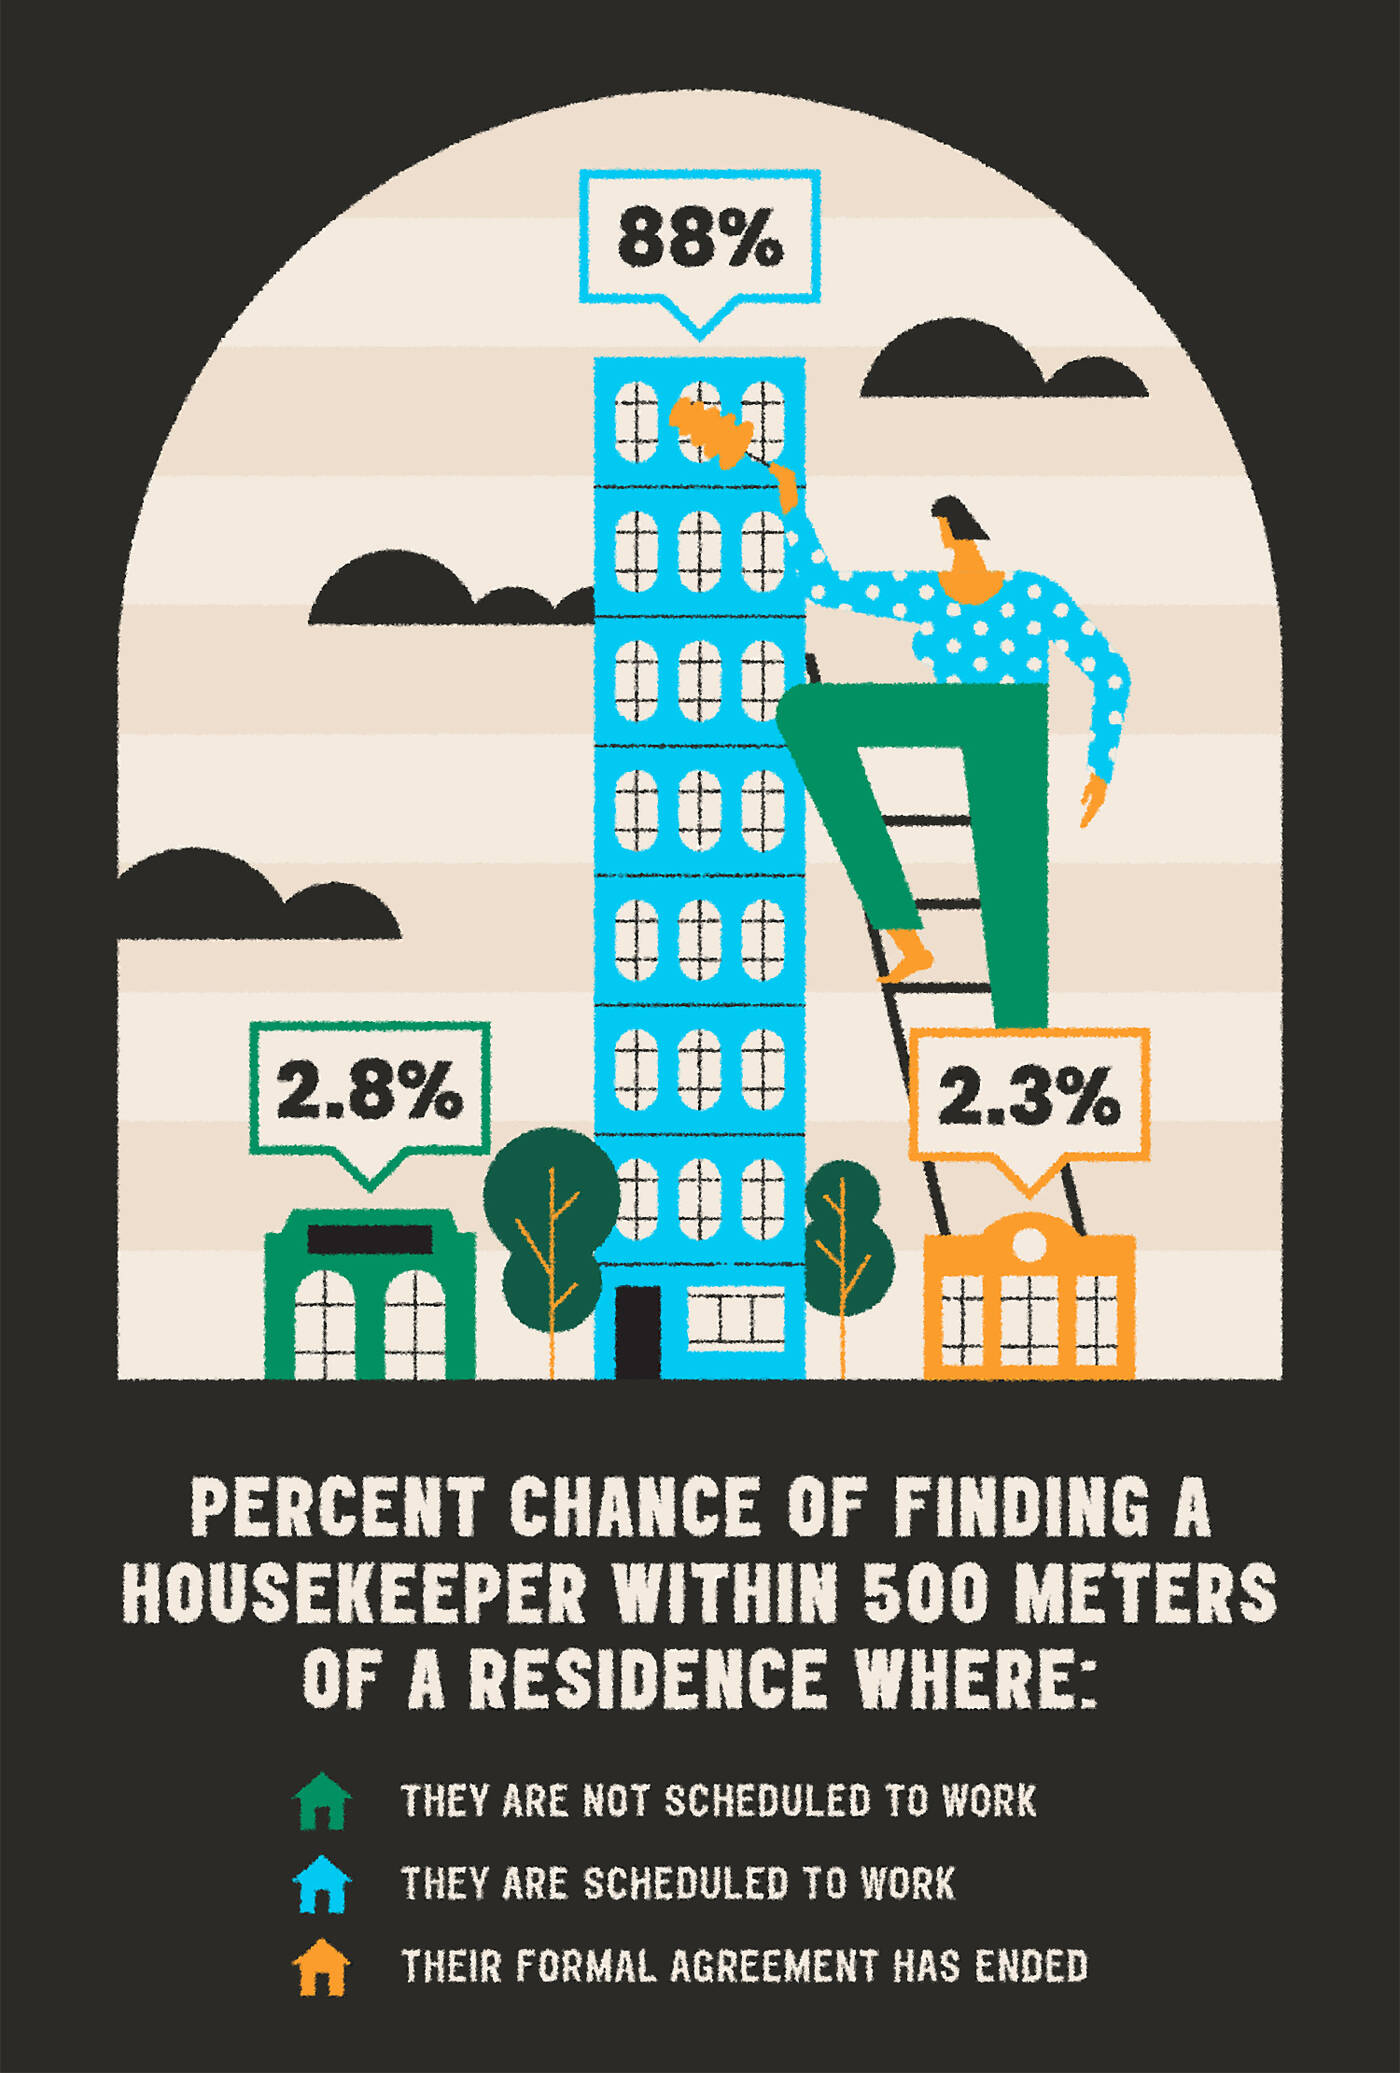 infographic showing percent change of finding a housekeeper within 500 meters of a residence where they are not scheduled to work (2.8%), where they are scheduled to work (88%), or where their formal agreement has ended (2.3%)